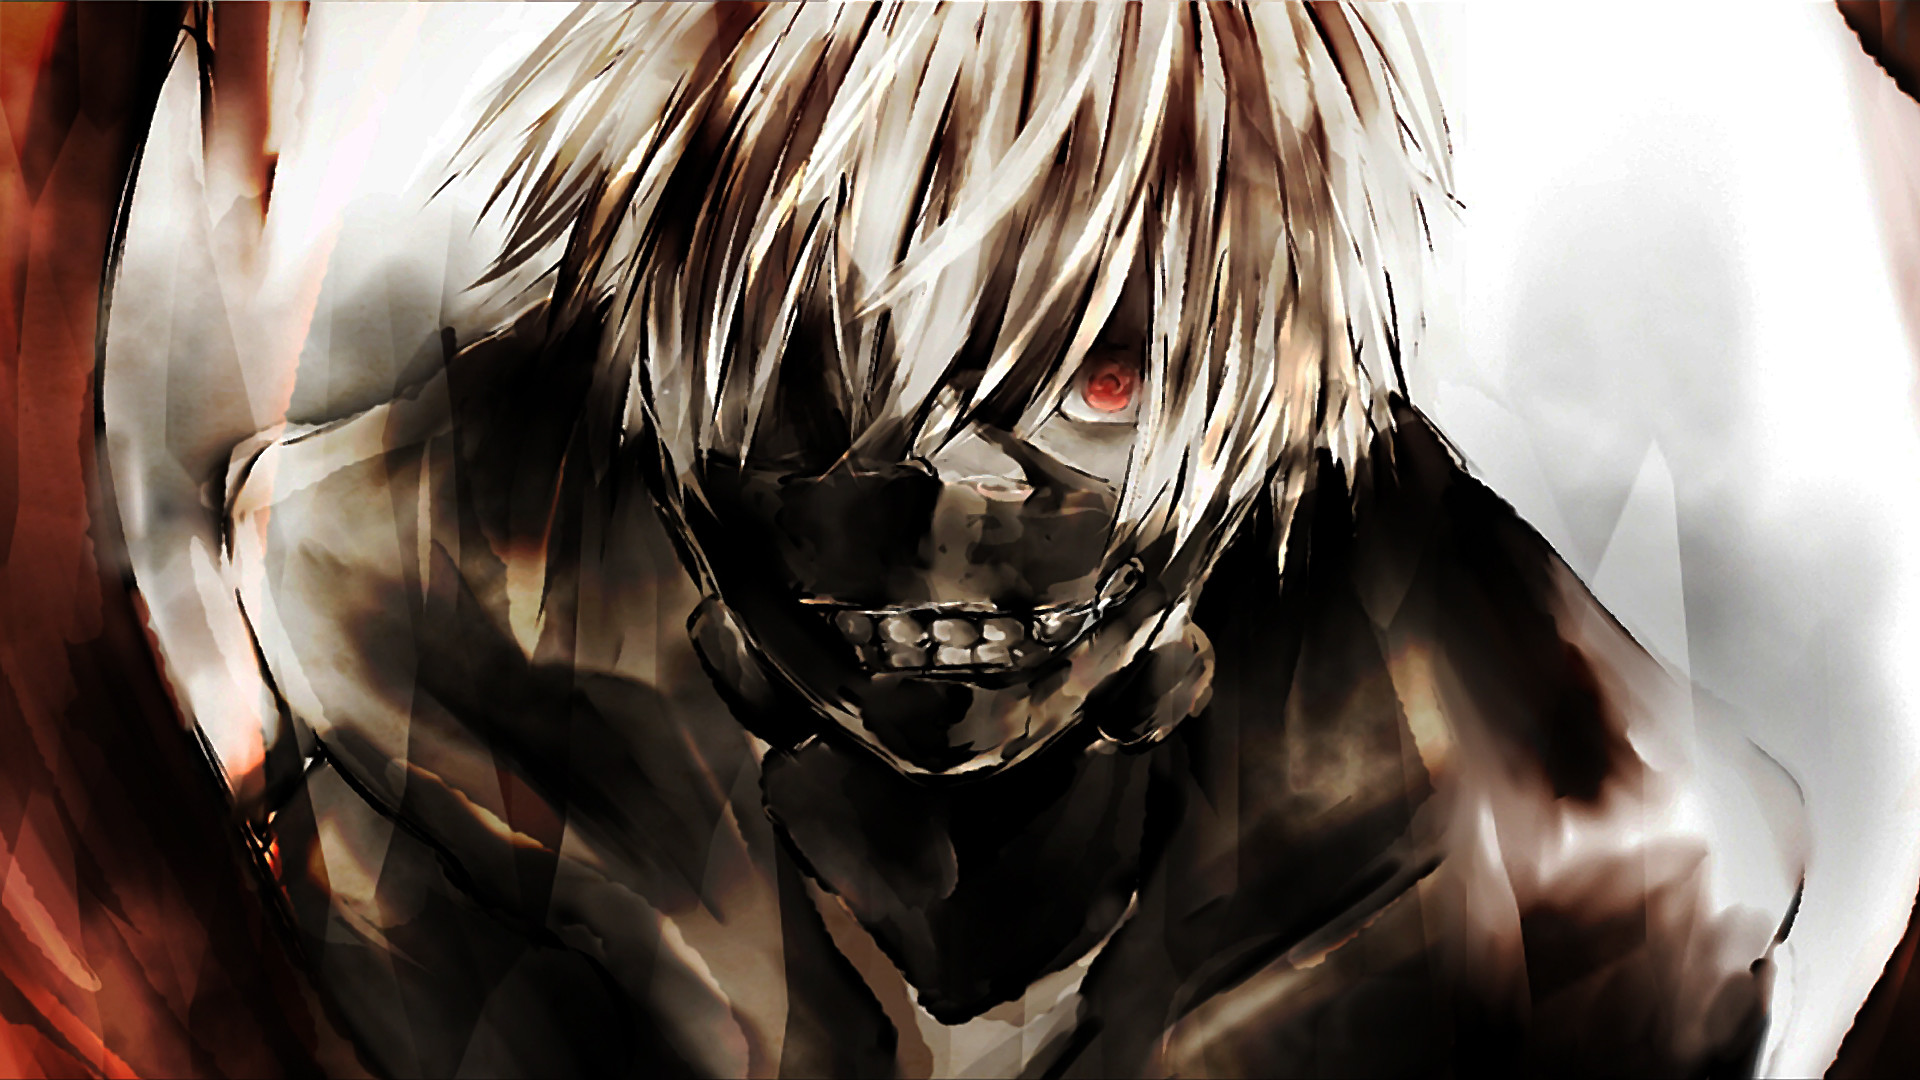 Tokyo Ghoul Hd Wallpaper Pictures to share, Tokyo Ghoul Hd Wallpaper Pix